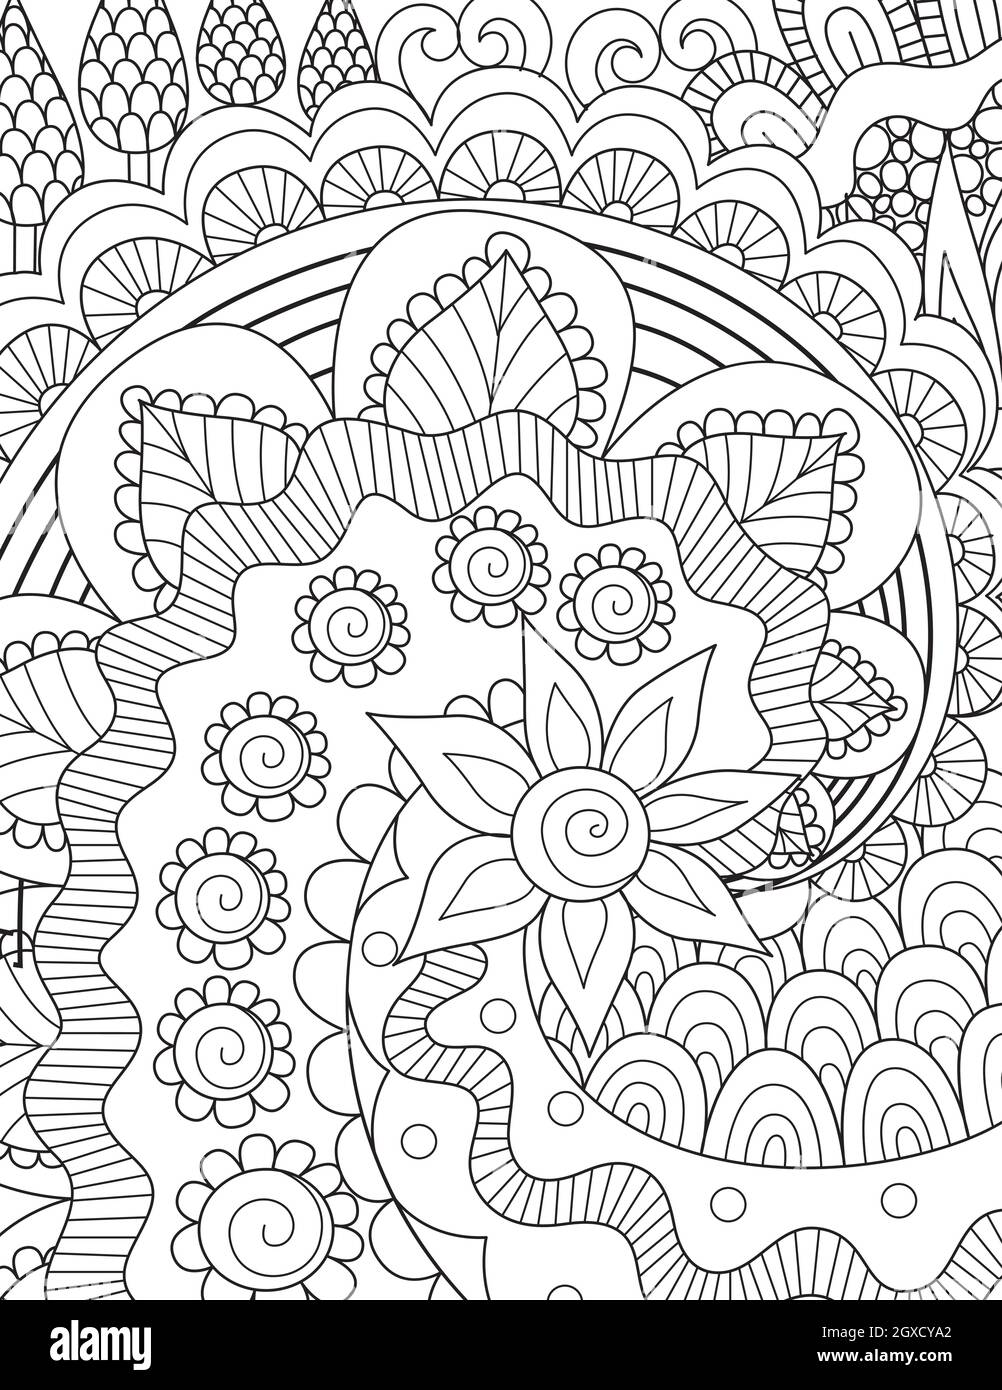 Anxiety Coloring Book Anxiety And Stress Relief Coloring Book: Stress-Relieving Coloring Pages For Adults, Art Therapy For Overcoming Anxiety And Depression [Book]